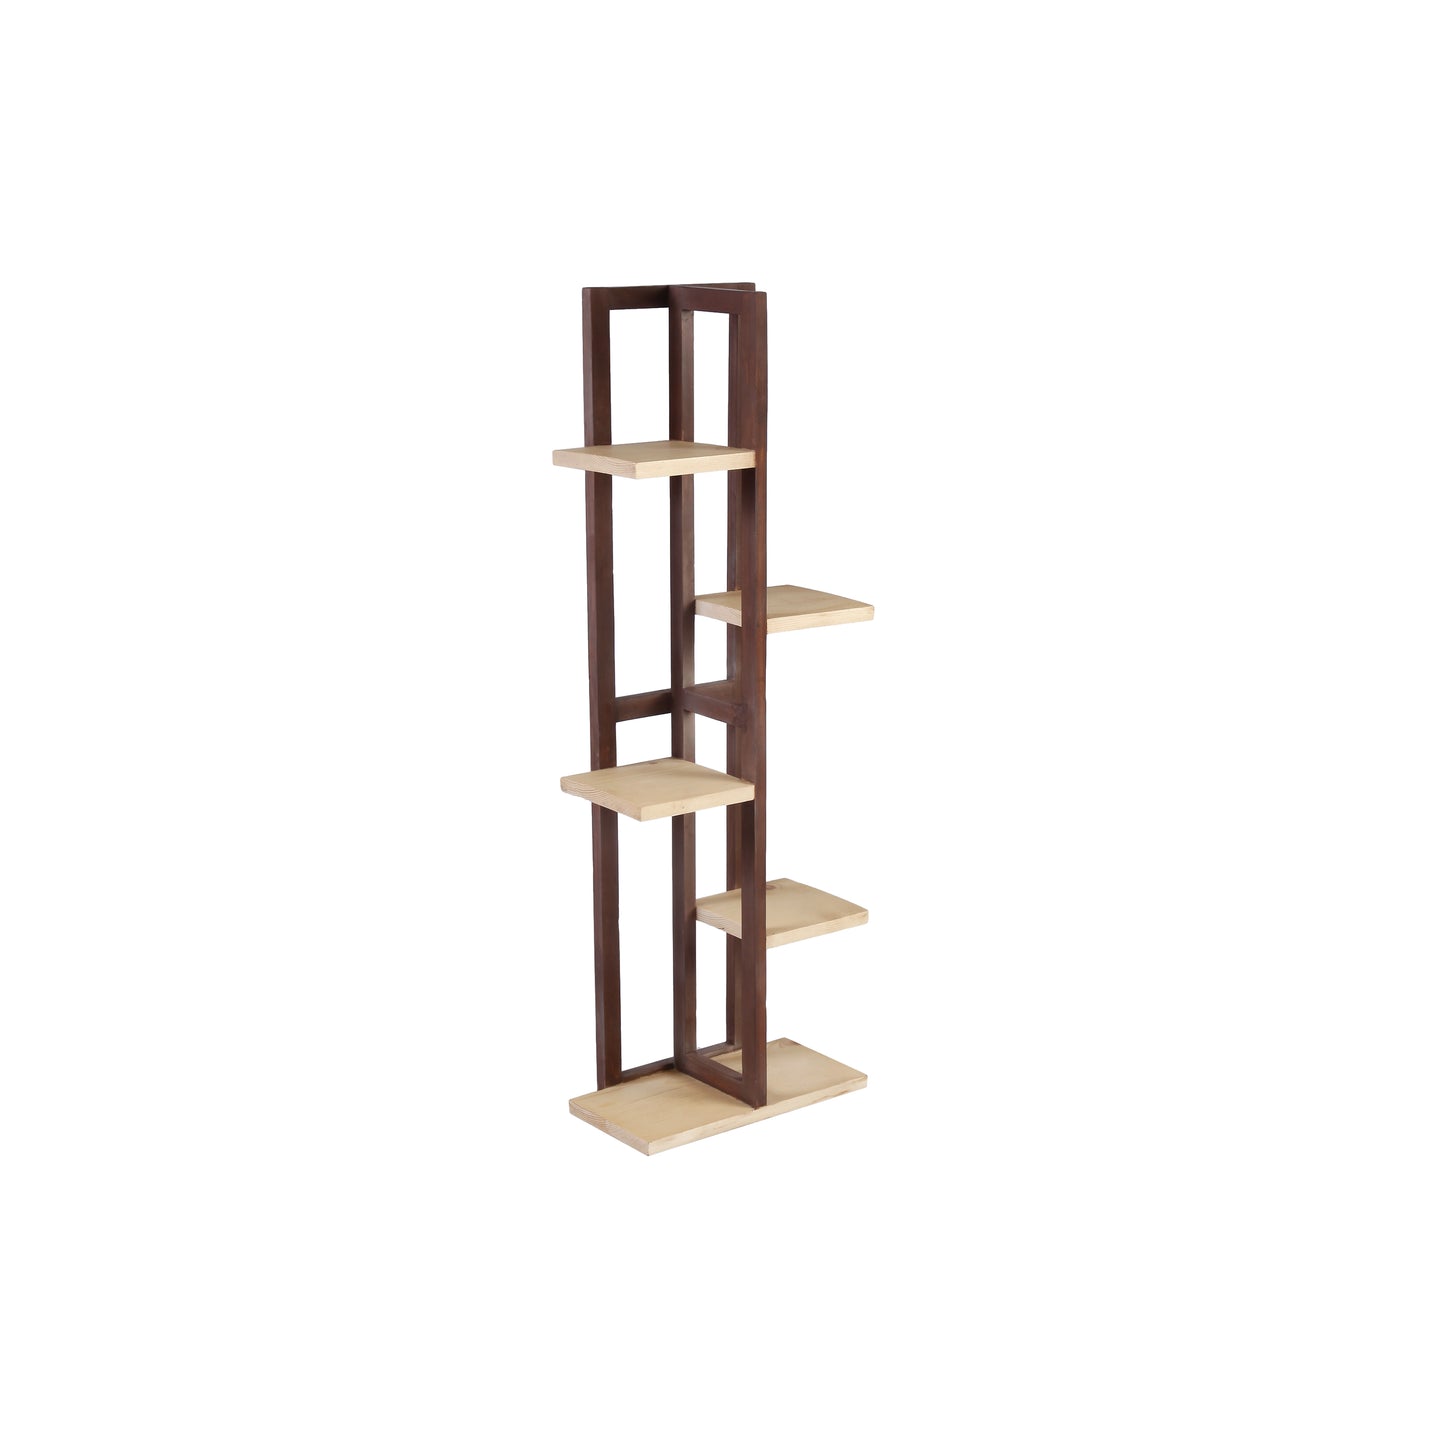 A Tiny Mistake All Purpose Five Tier Stand (One Piece) (For Planters, Ornaments and Accessories) (Dark Stand with Natural Pine Wood Planks)